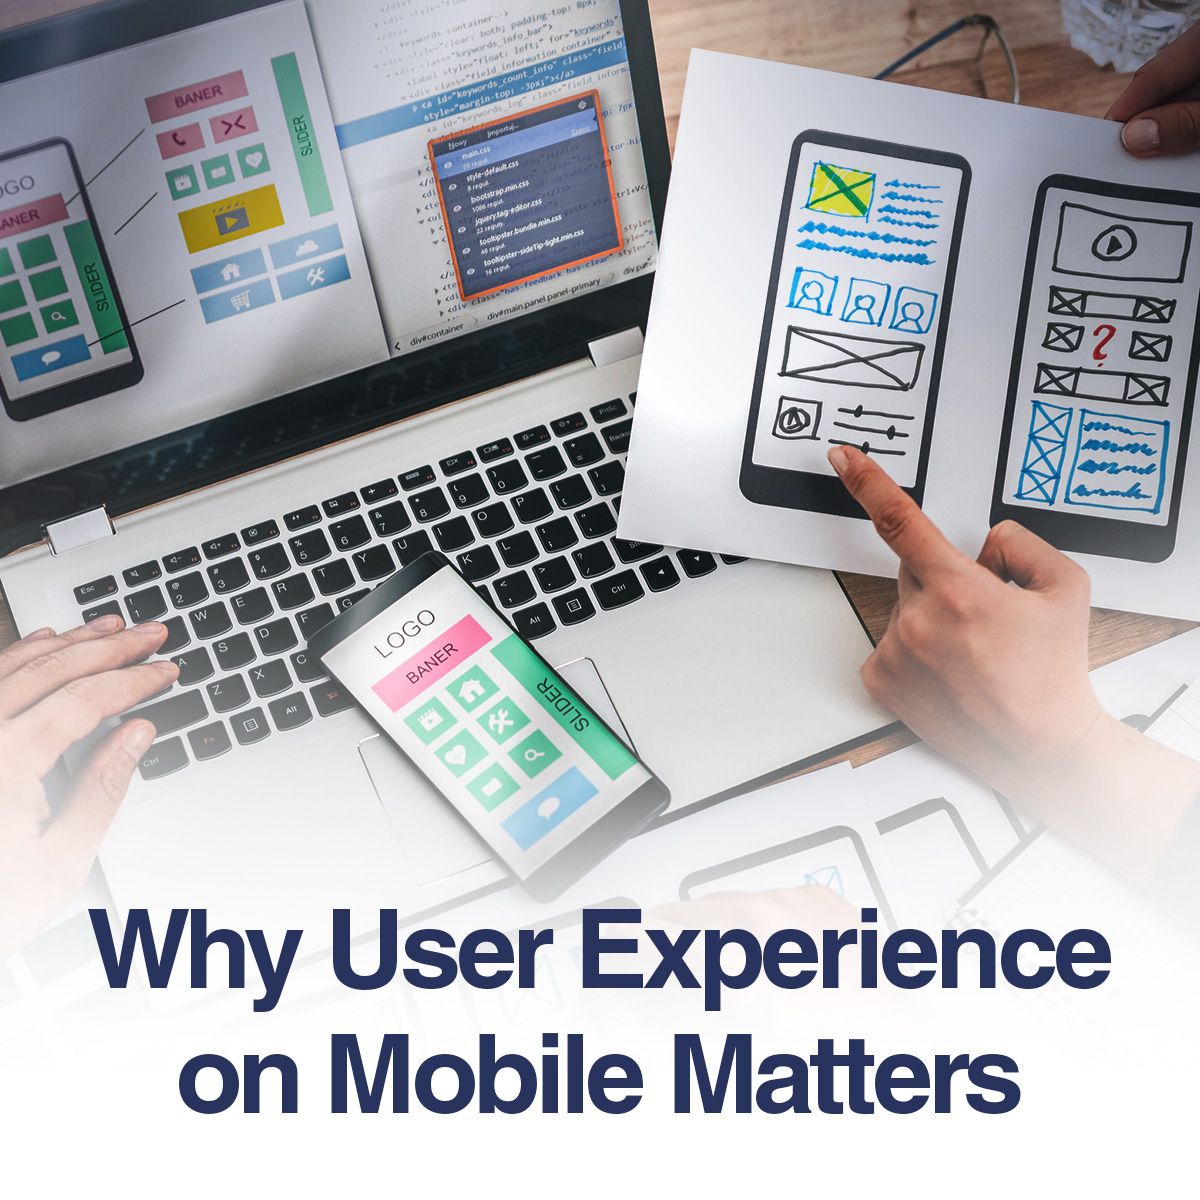 Why User Experience on Mobile Matters